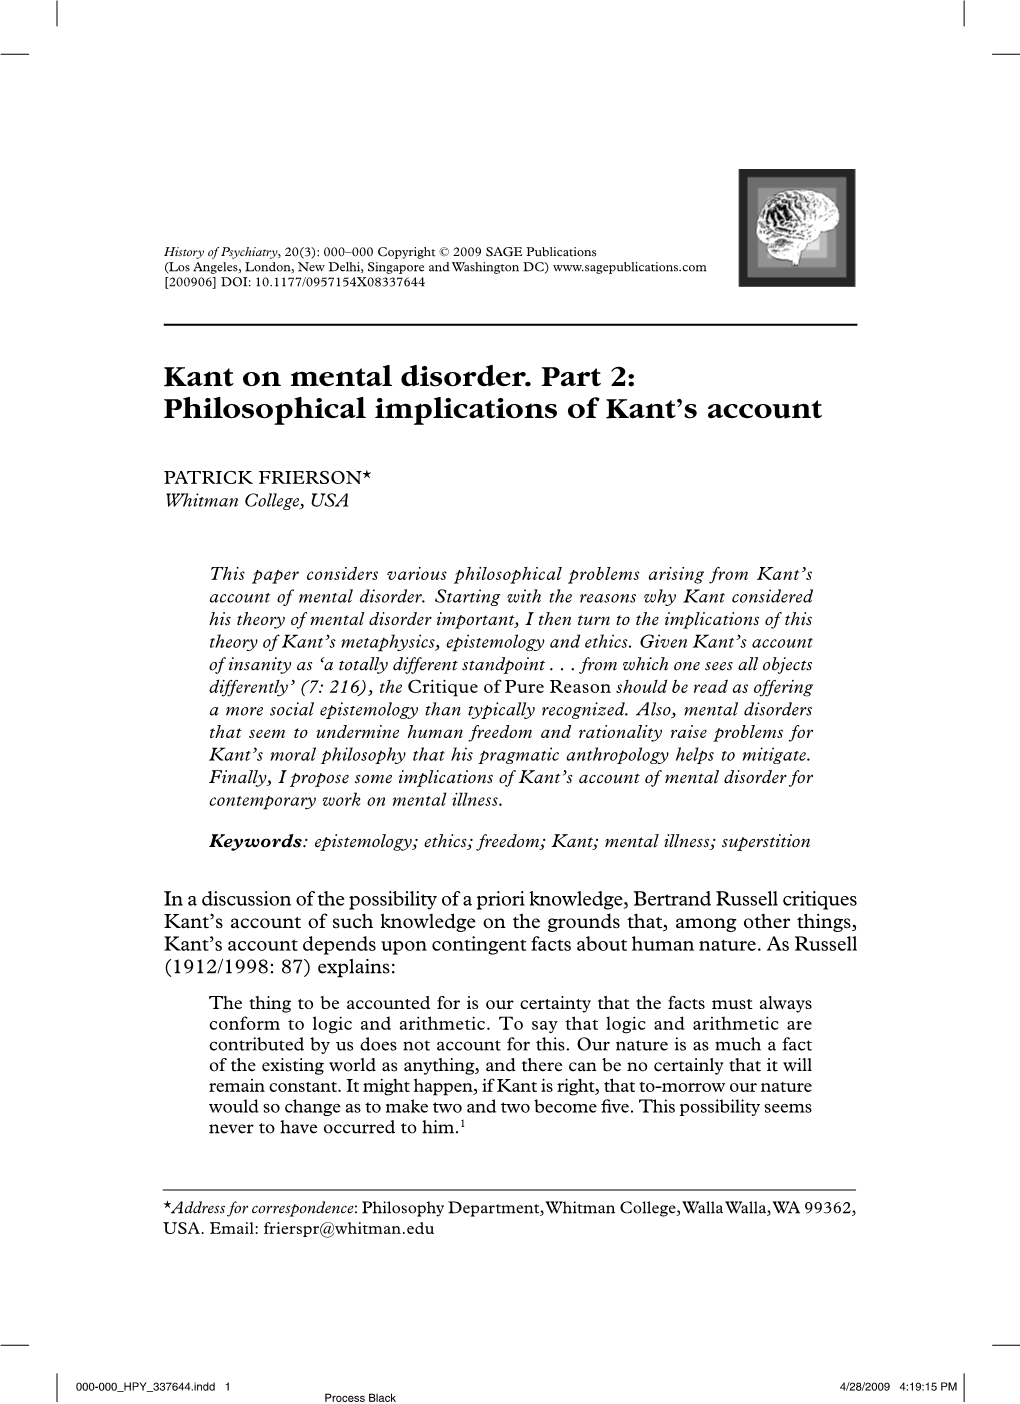 Kant on Mental Disorder. Part 2: Philosophical Implications of Kant's